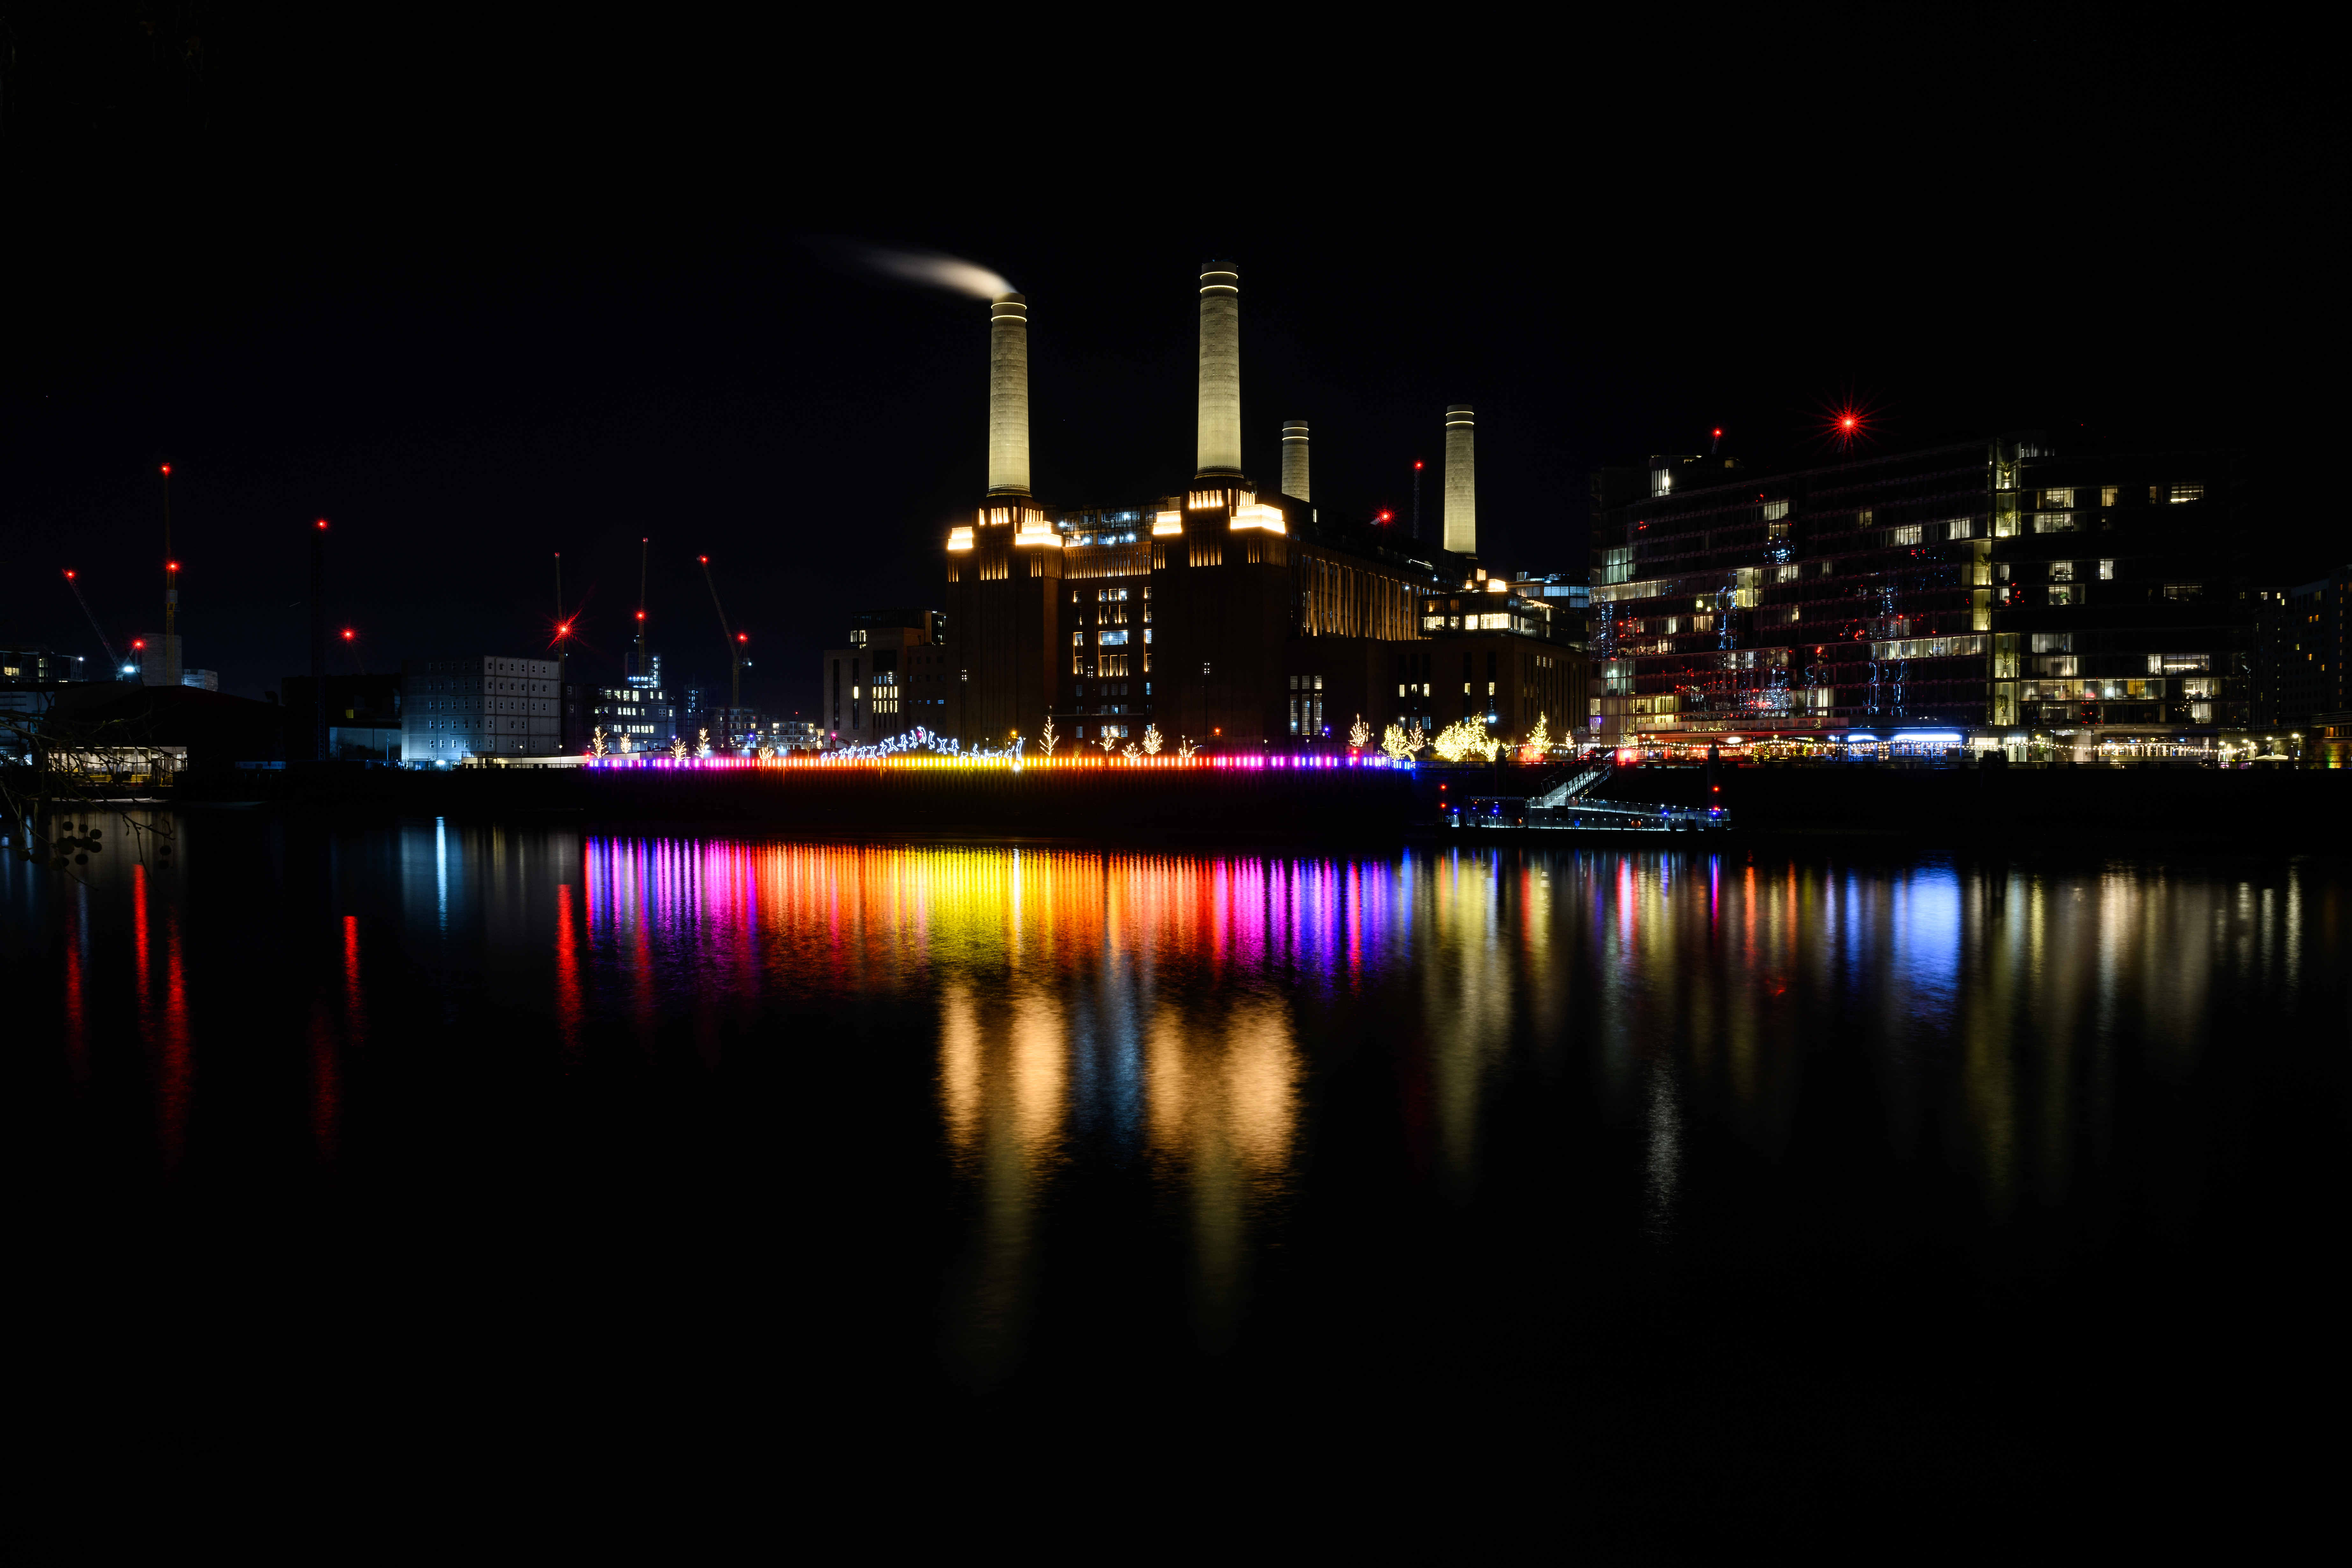 The Light Festival At Battersea Power Station Opens To The Public